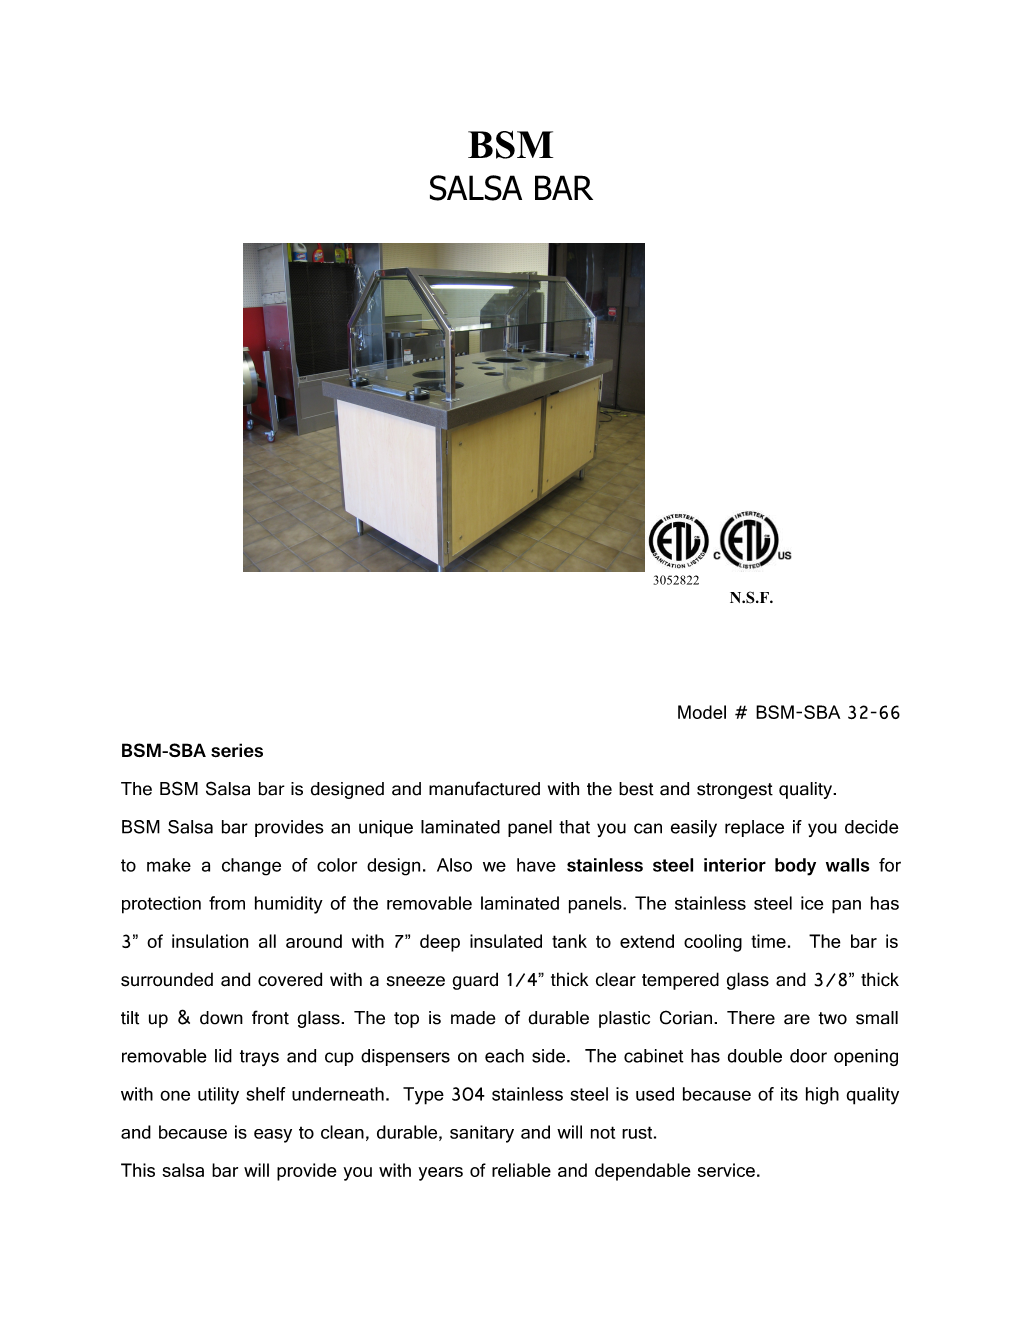 The BSM Salsa Bar Is Designed and Manufactured with the Best and Strongest Quality